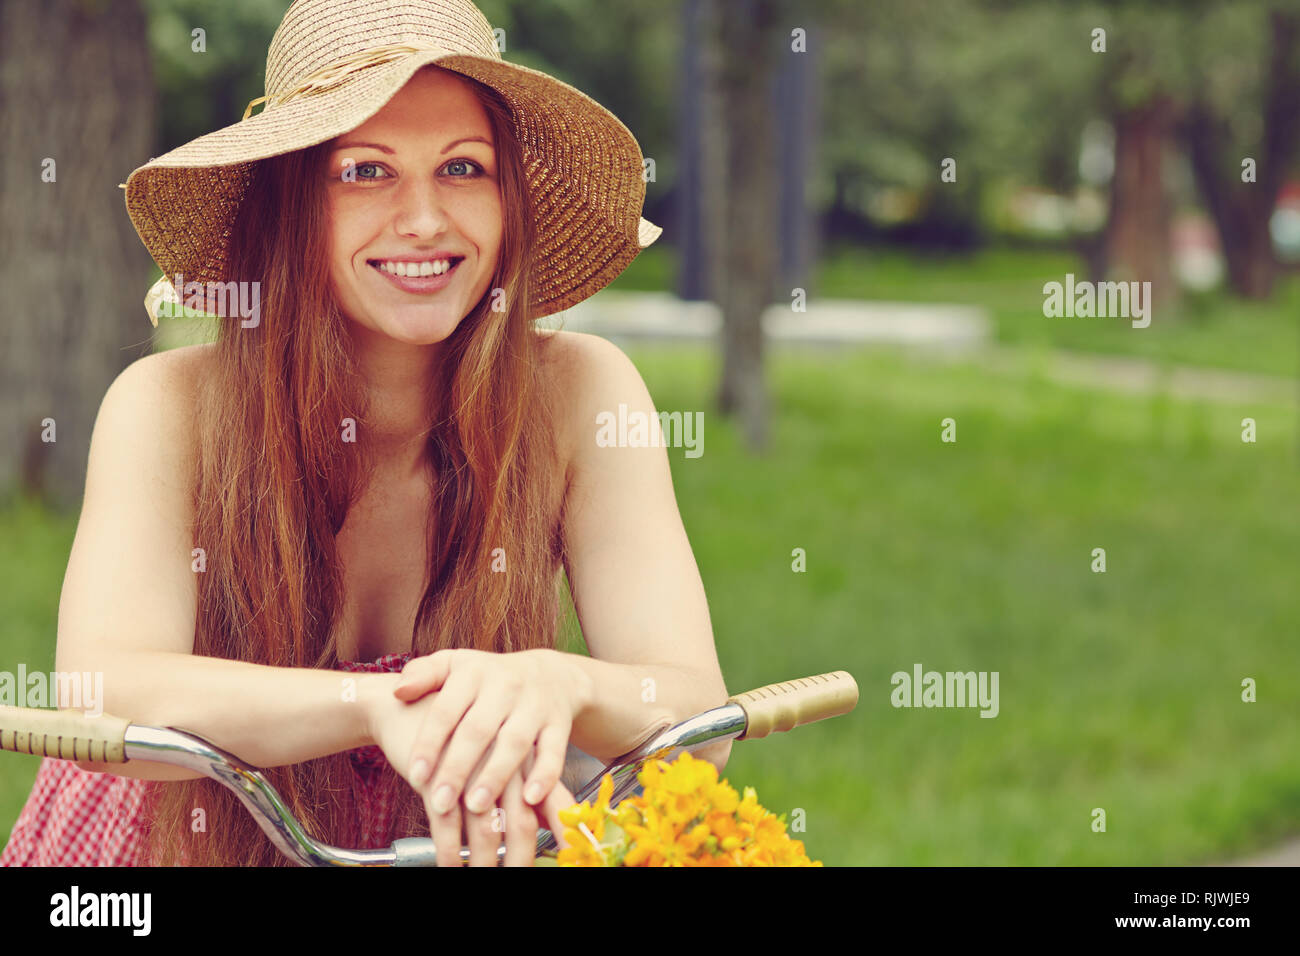 young woman in a dress and hat with a bike with flowers in a basket in a summer park Stock Photo